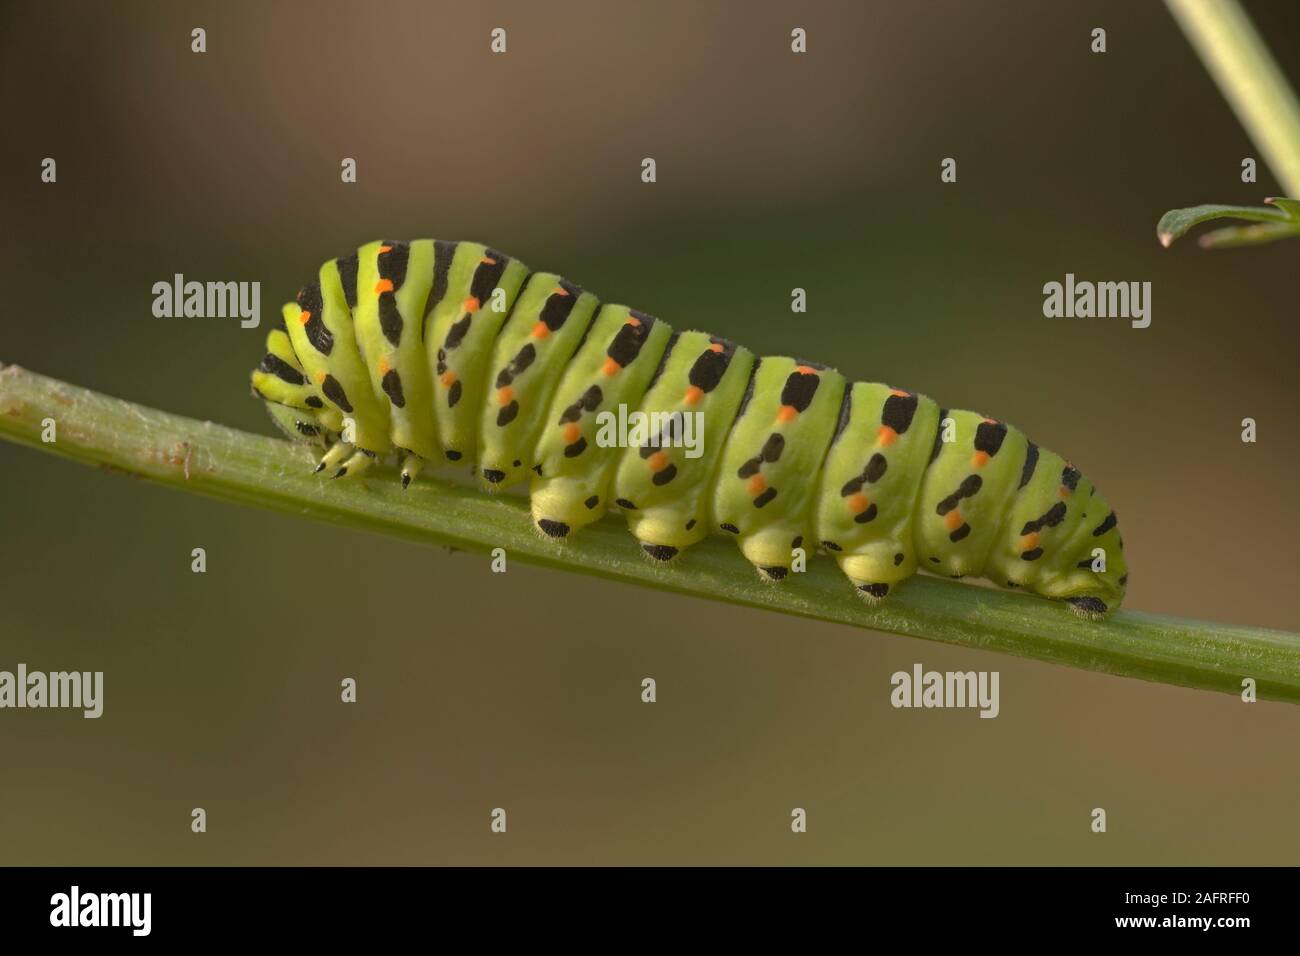 SWALLOWTAIL BUTTERFLY caterpillar (Papillio machaon britannicus), on a stem of Milk Parsley (Peucedanum palustre). Hickling Broad National Nature Rese Stock Photo